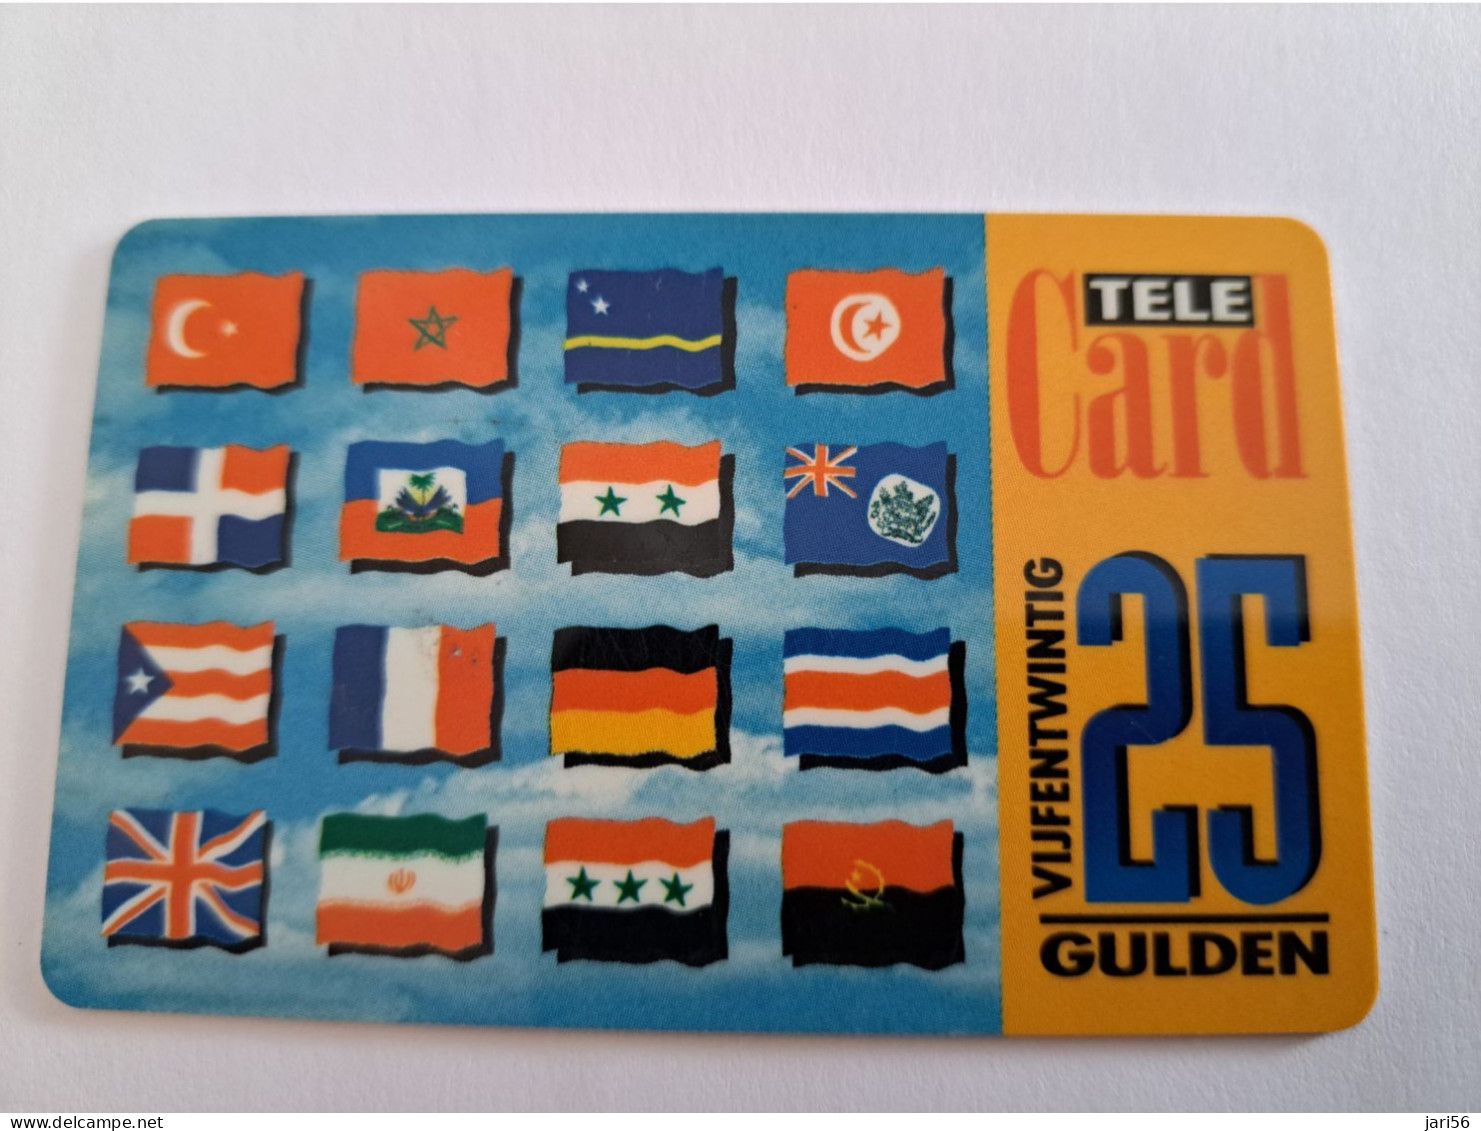 NETHERLANDS/ PREPAID/  HFL 25,- ,- /FLAGS OF THE DIFFERENT COUNTRYS/   - USED CARD  ** 13942** - [3] Sim Cards, Prepaid & Refills